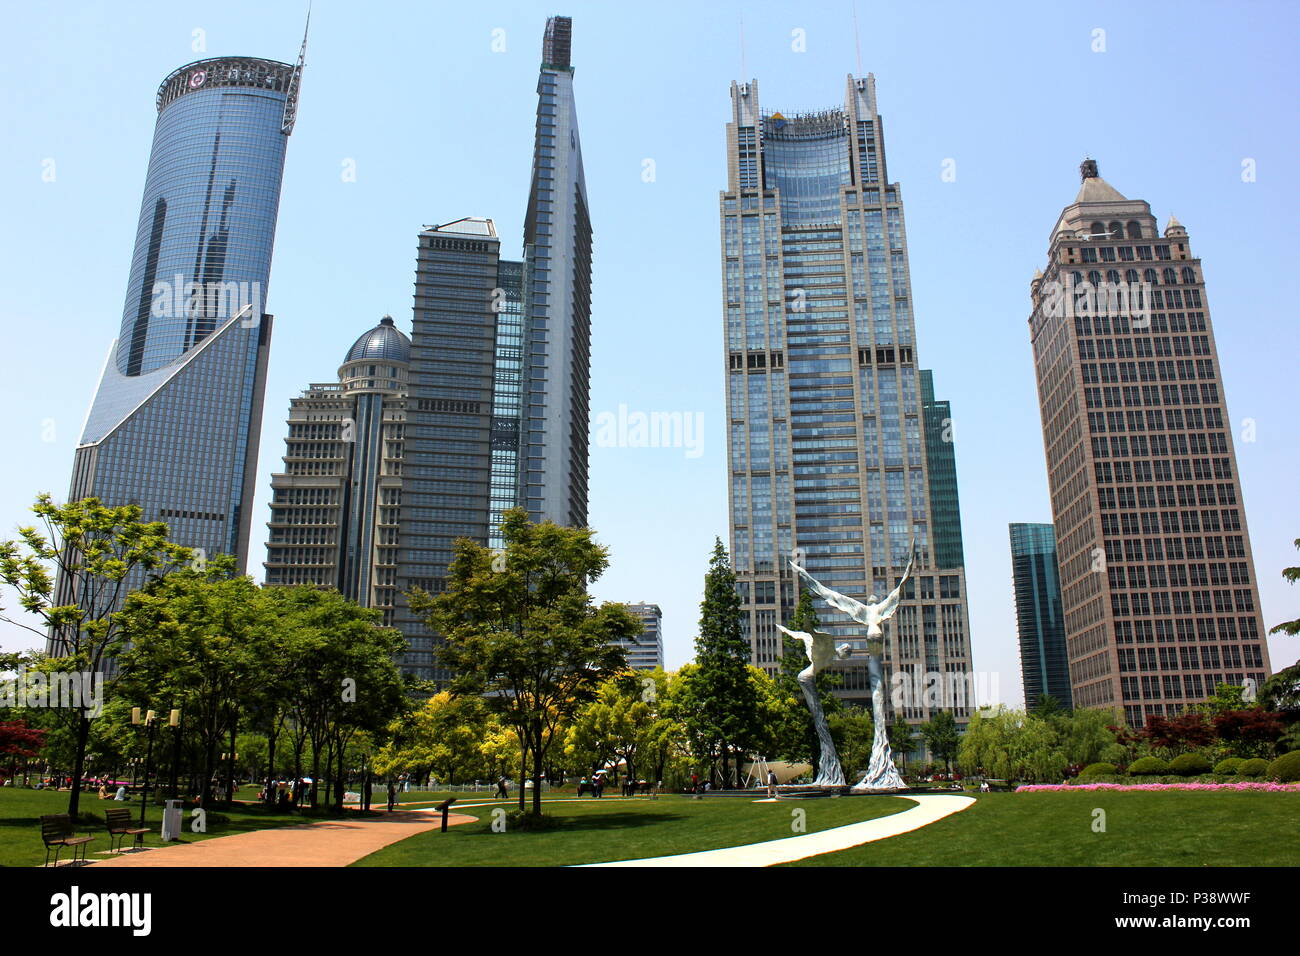 Skyscrapers/high rise building / apartments in Lujiazui, Shanghai, China Stock Photo